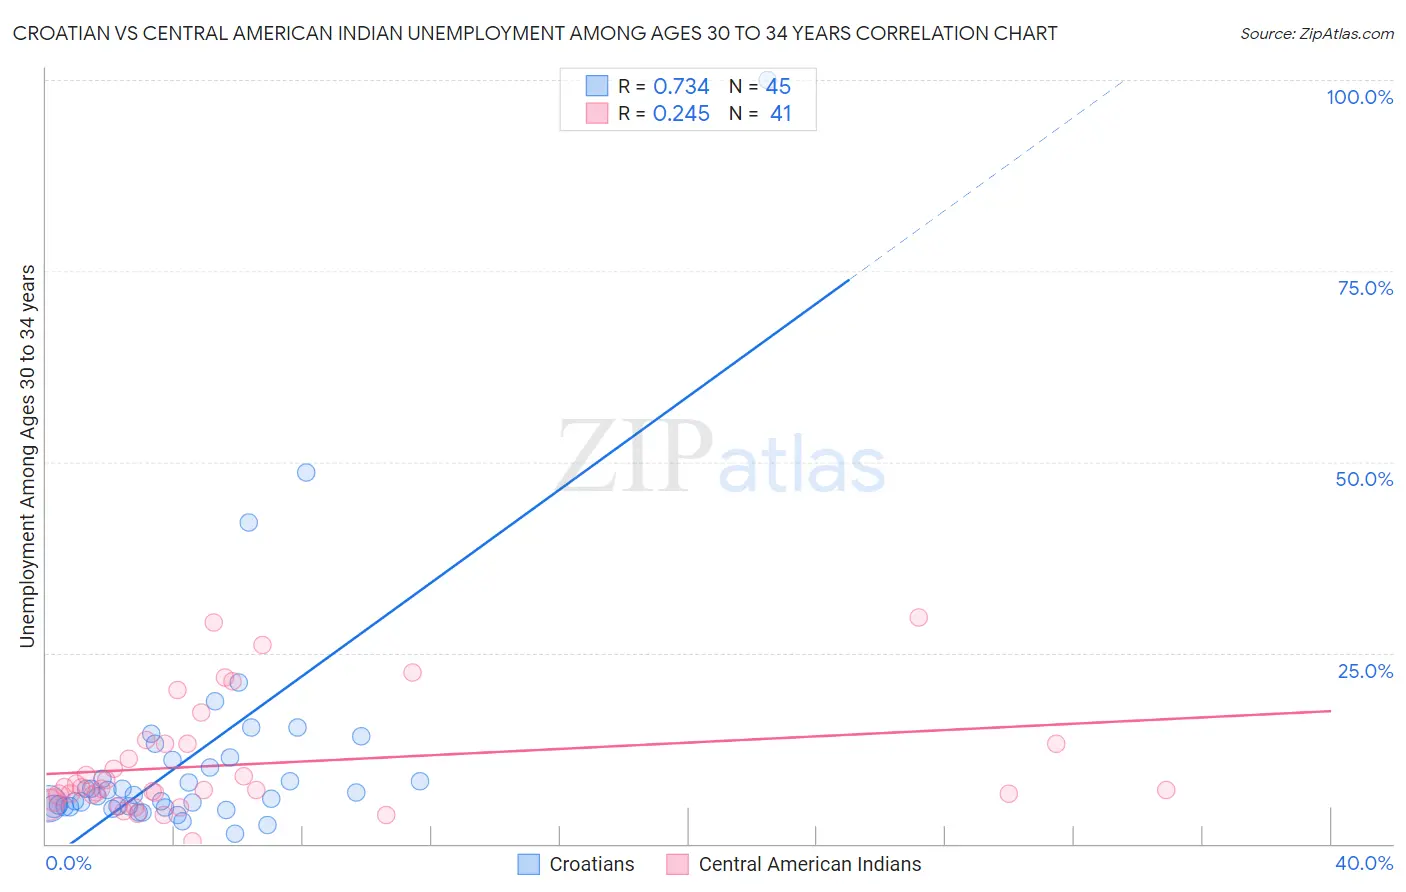 Croatian vs Central American Indian Unemployment Among Ages 30 to 34 years